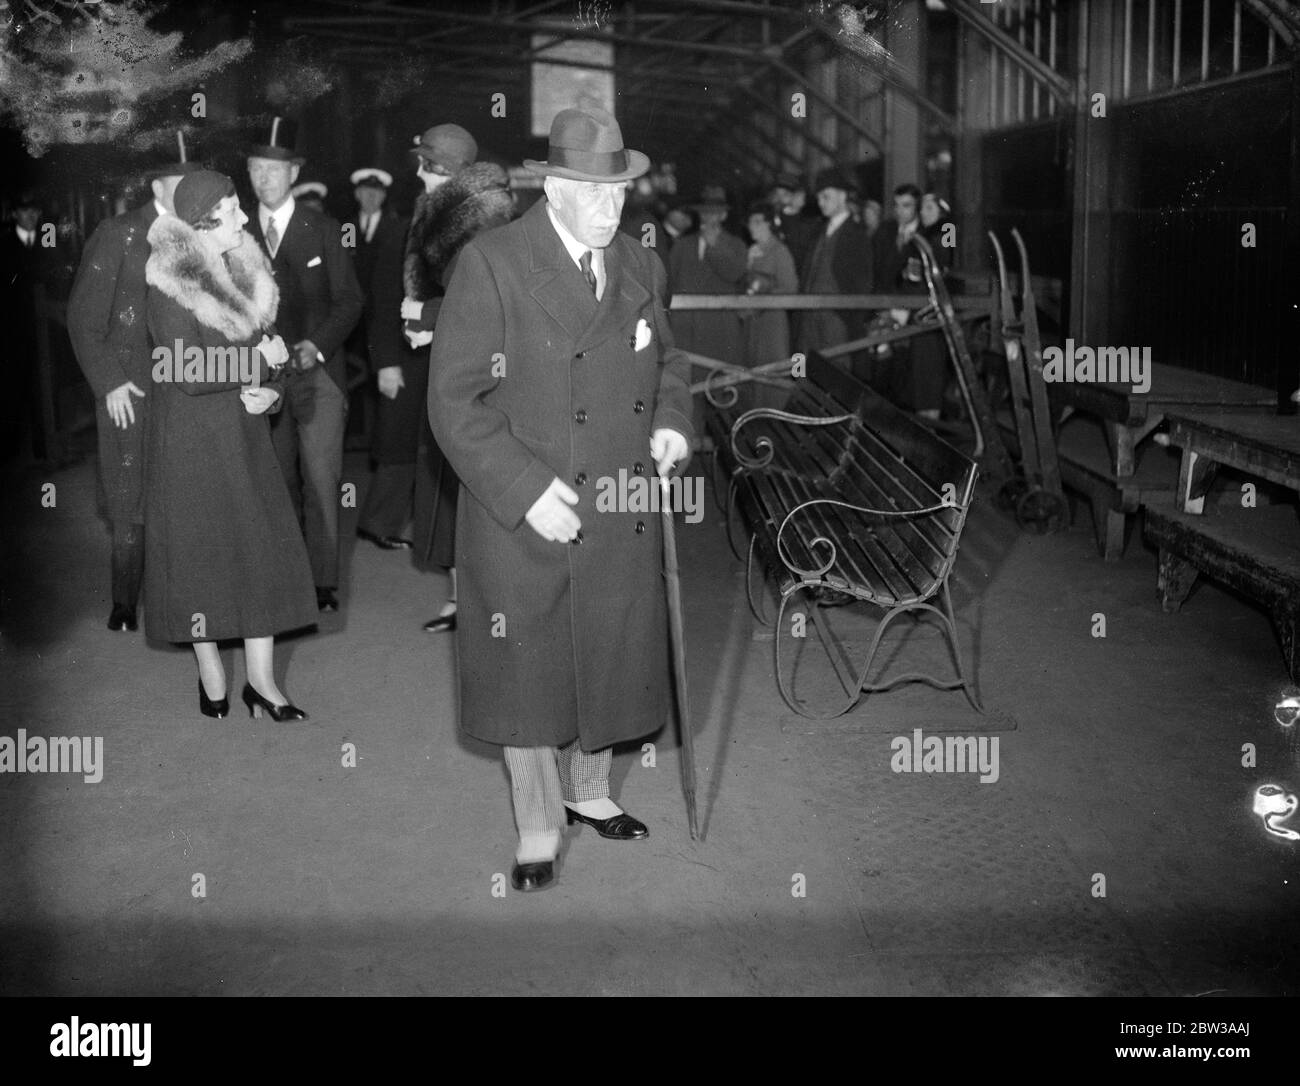 Duke of Connaught arrives back in London . The Duke of Connaught who has been spending a holiday on the Riviera , arrived back in London at Victoria Station . Photo shows the Duke of Connaught at Victoria Station on arrival . 6 May 1934 Stock Photo